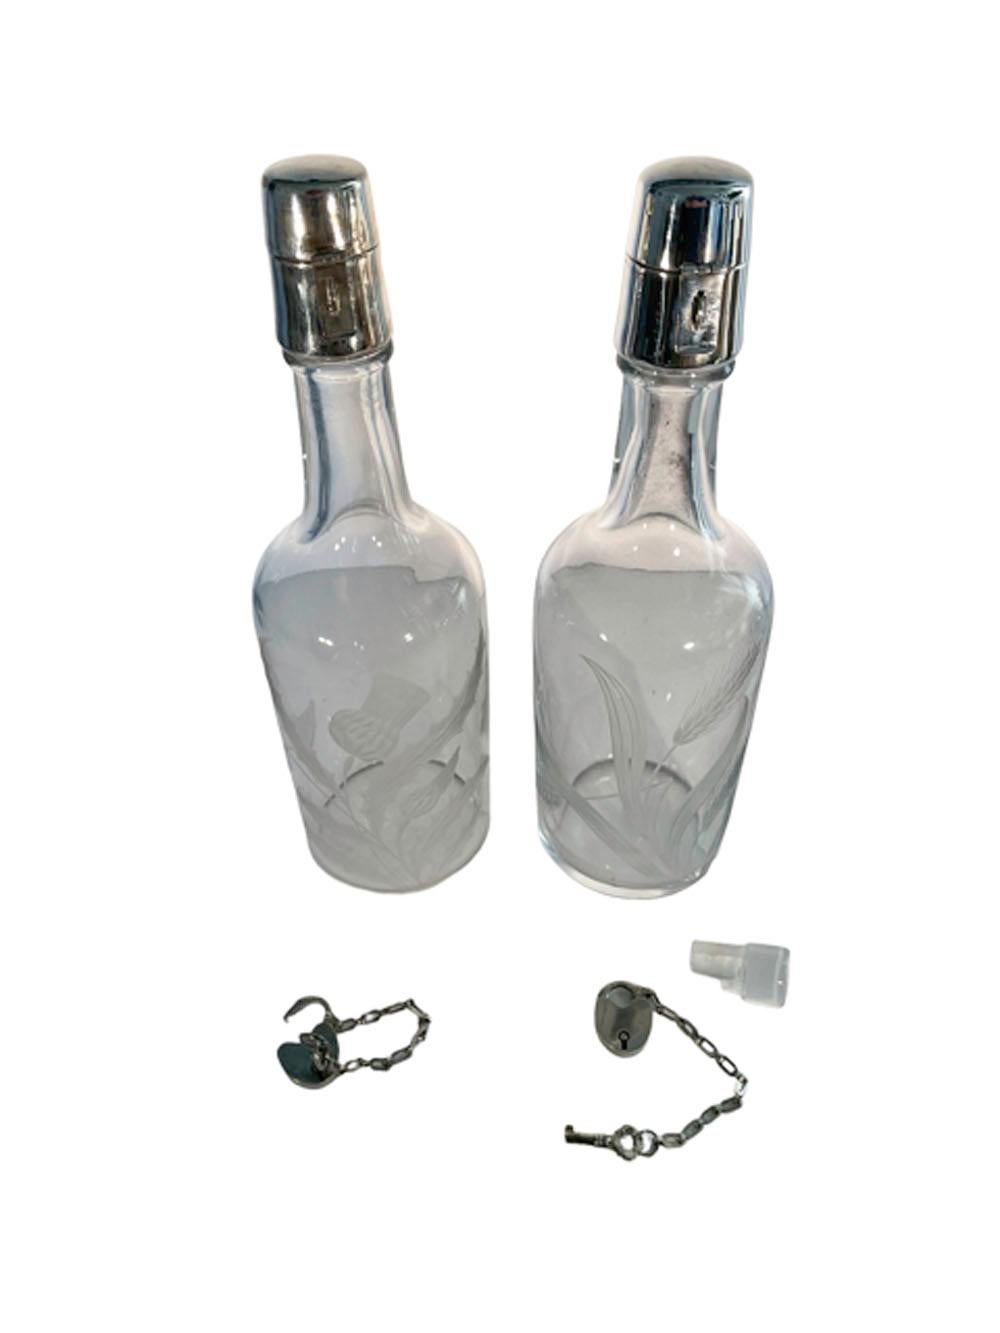 American Pair of Sterling Silver Mounted Locking Liquor Bottles by T.G. Hawkes